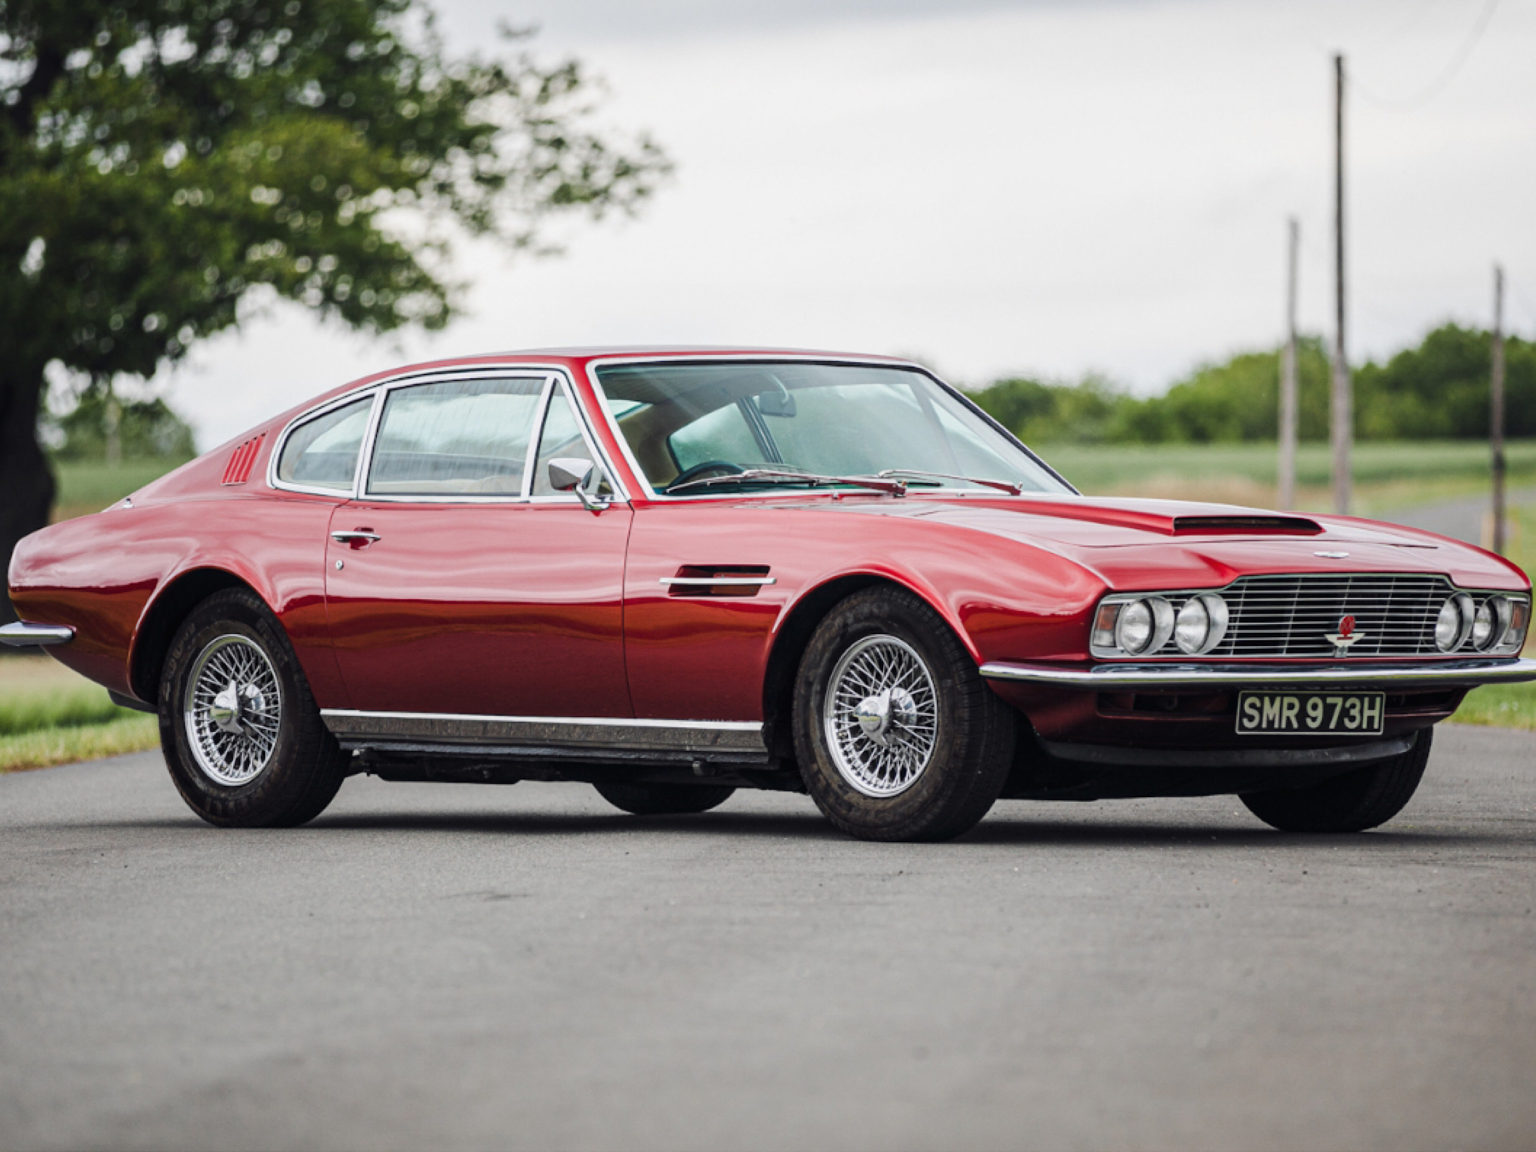 The Aston Martin DBS is still a get, decades after it was new.